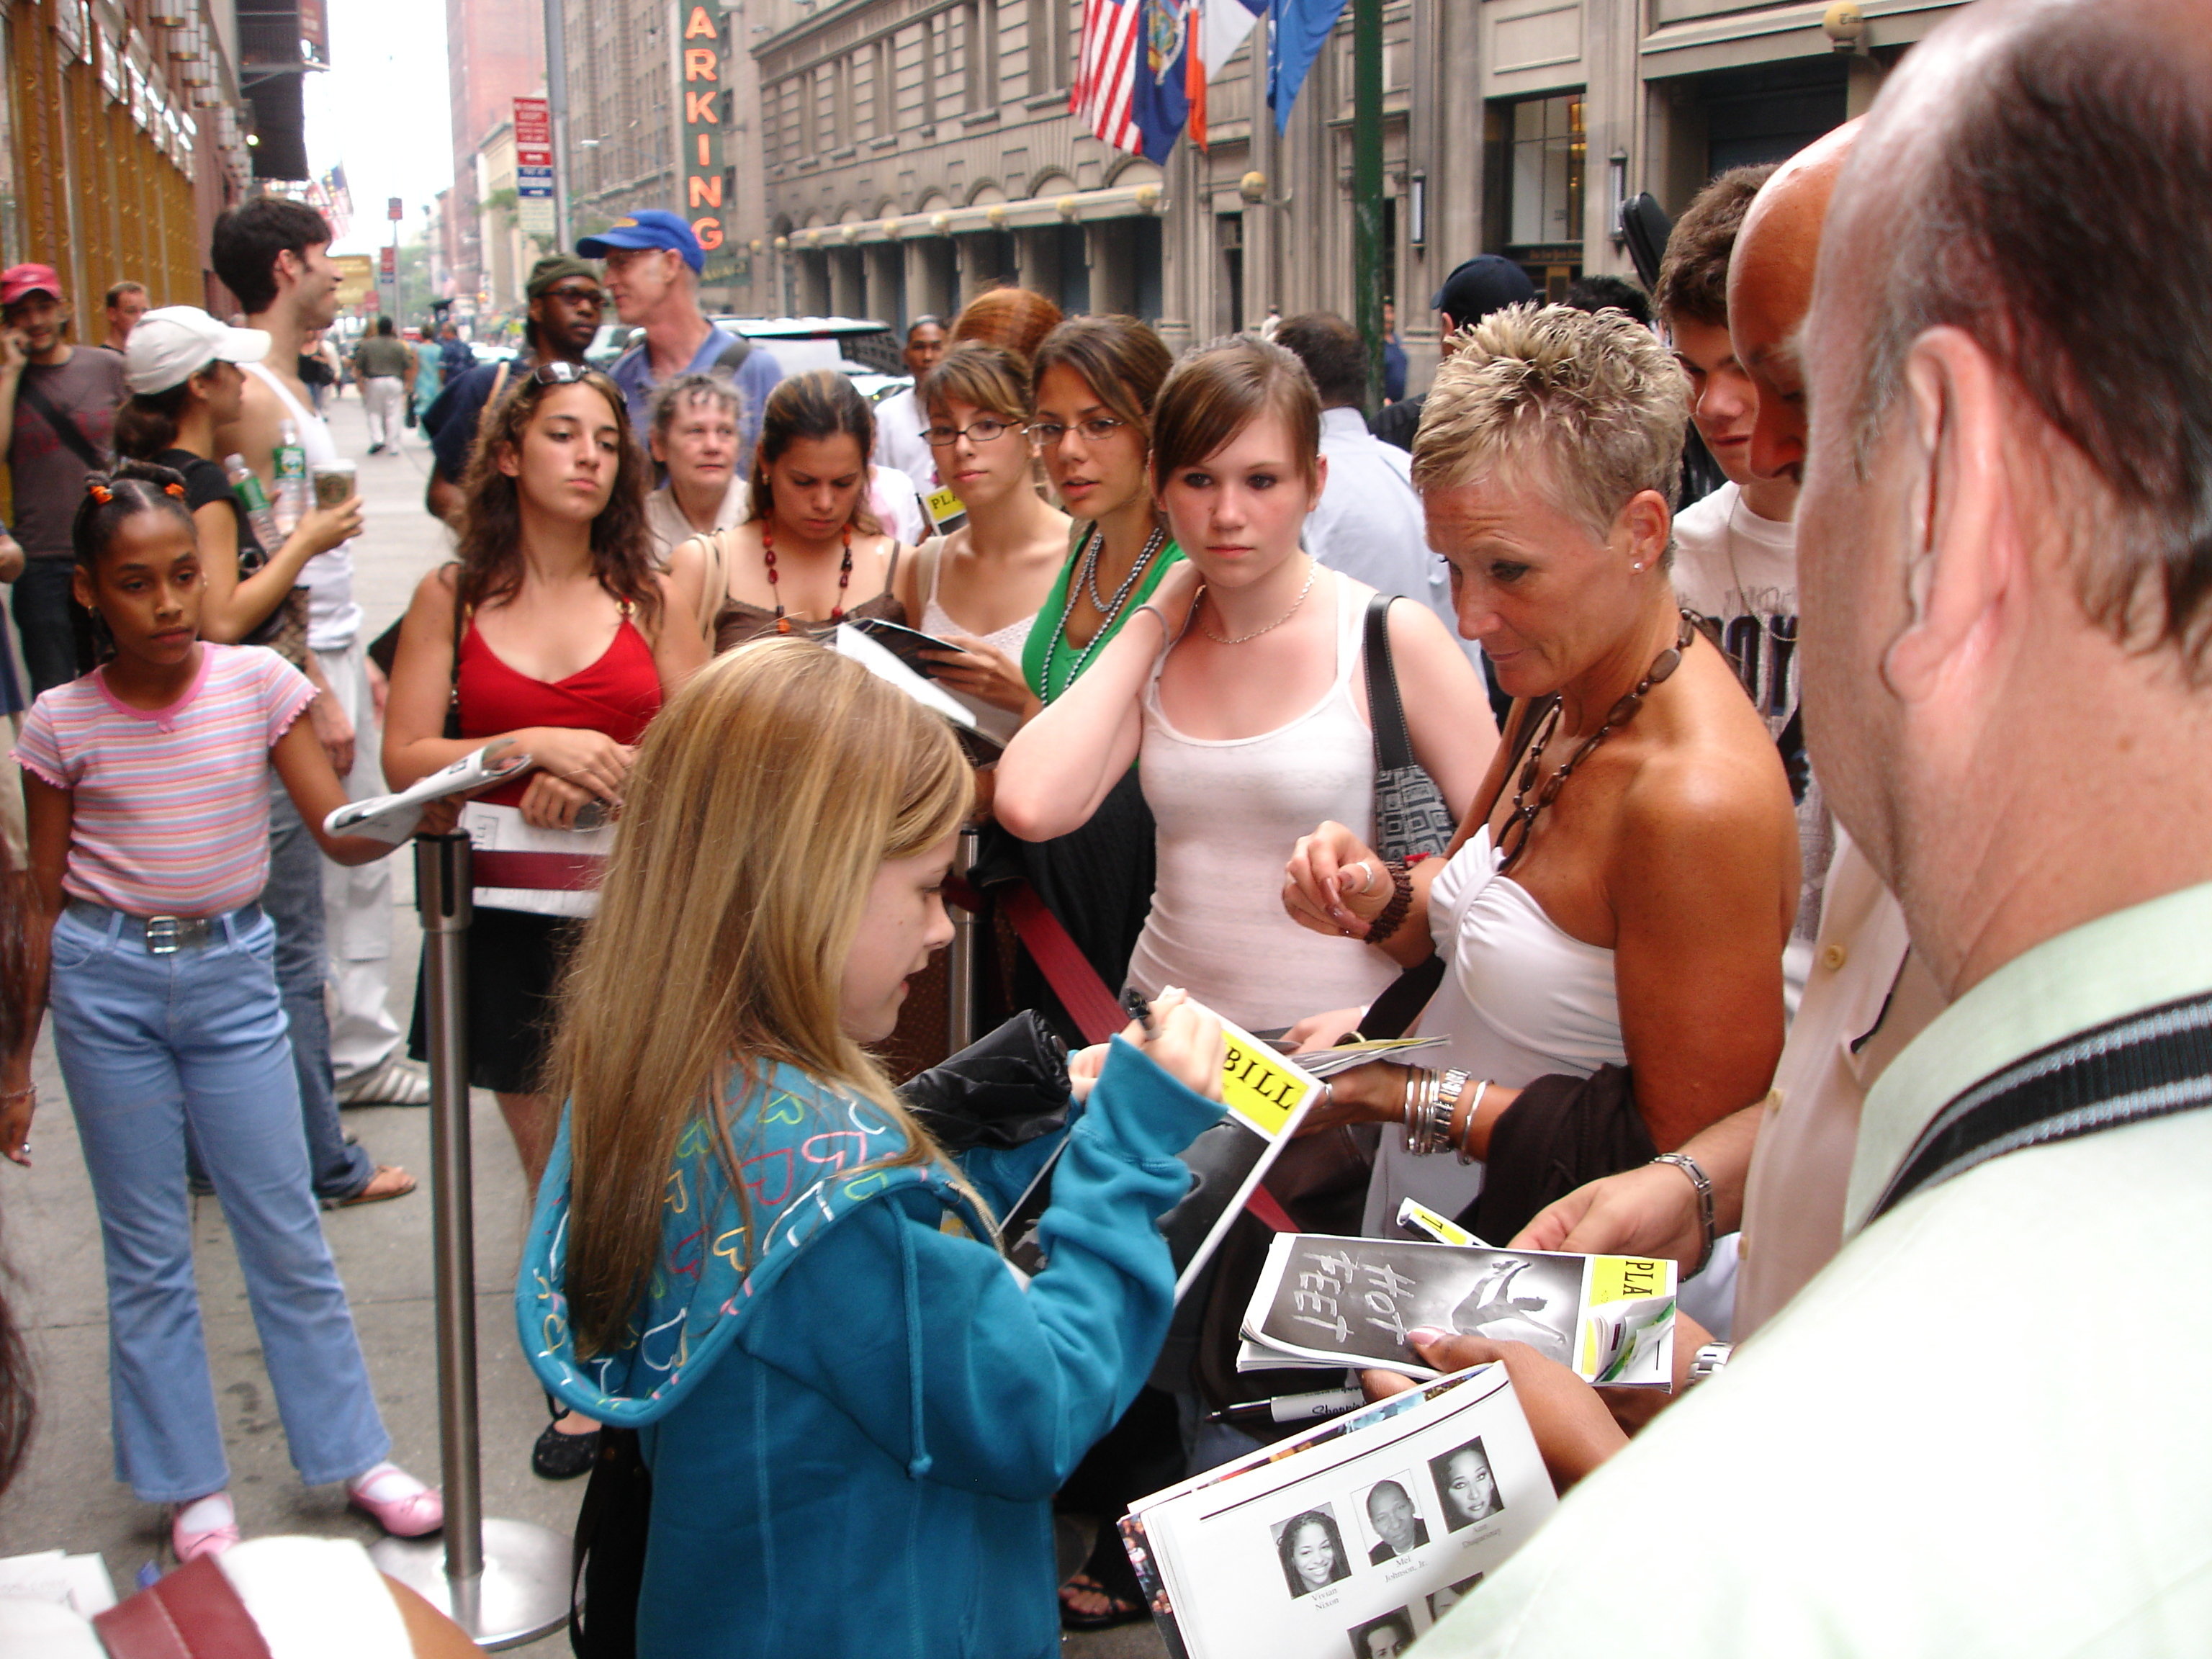 Sarah signing autographs after performing the role of Emma in Hot Feet at the Hilton Theatre on Broadway